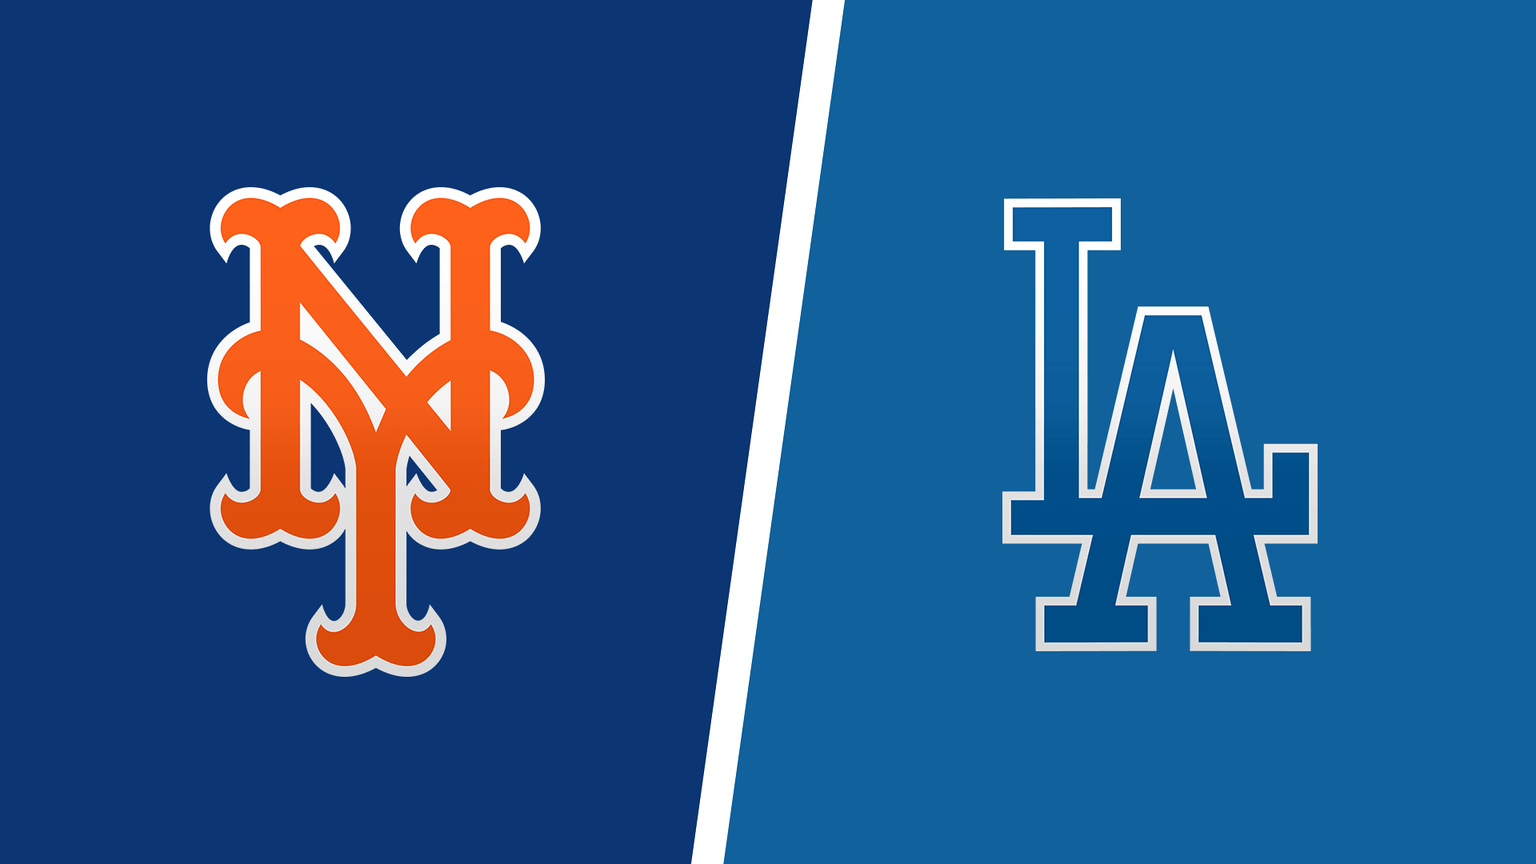 How to Watch Los Angeles Dodgers vs. New York Mets Live Online on